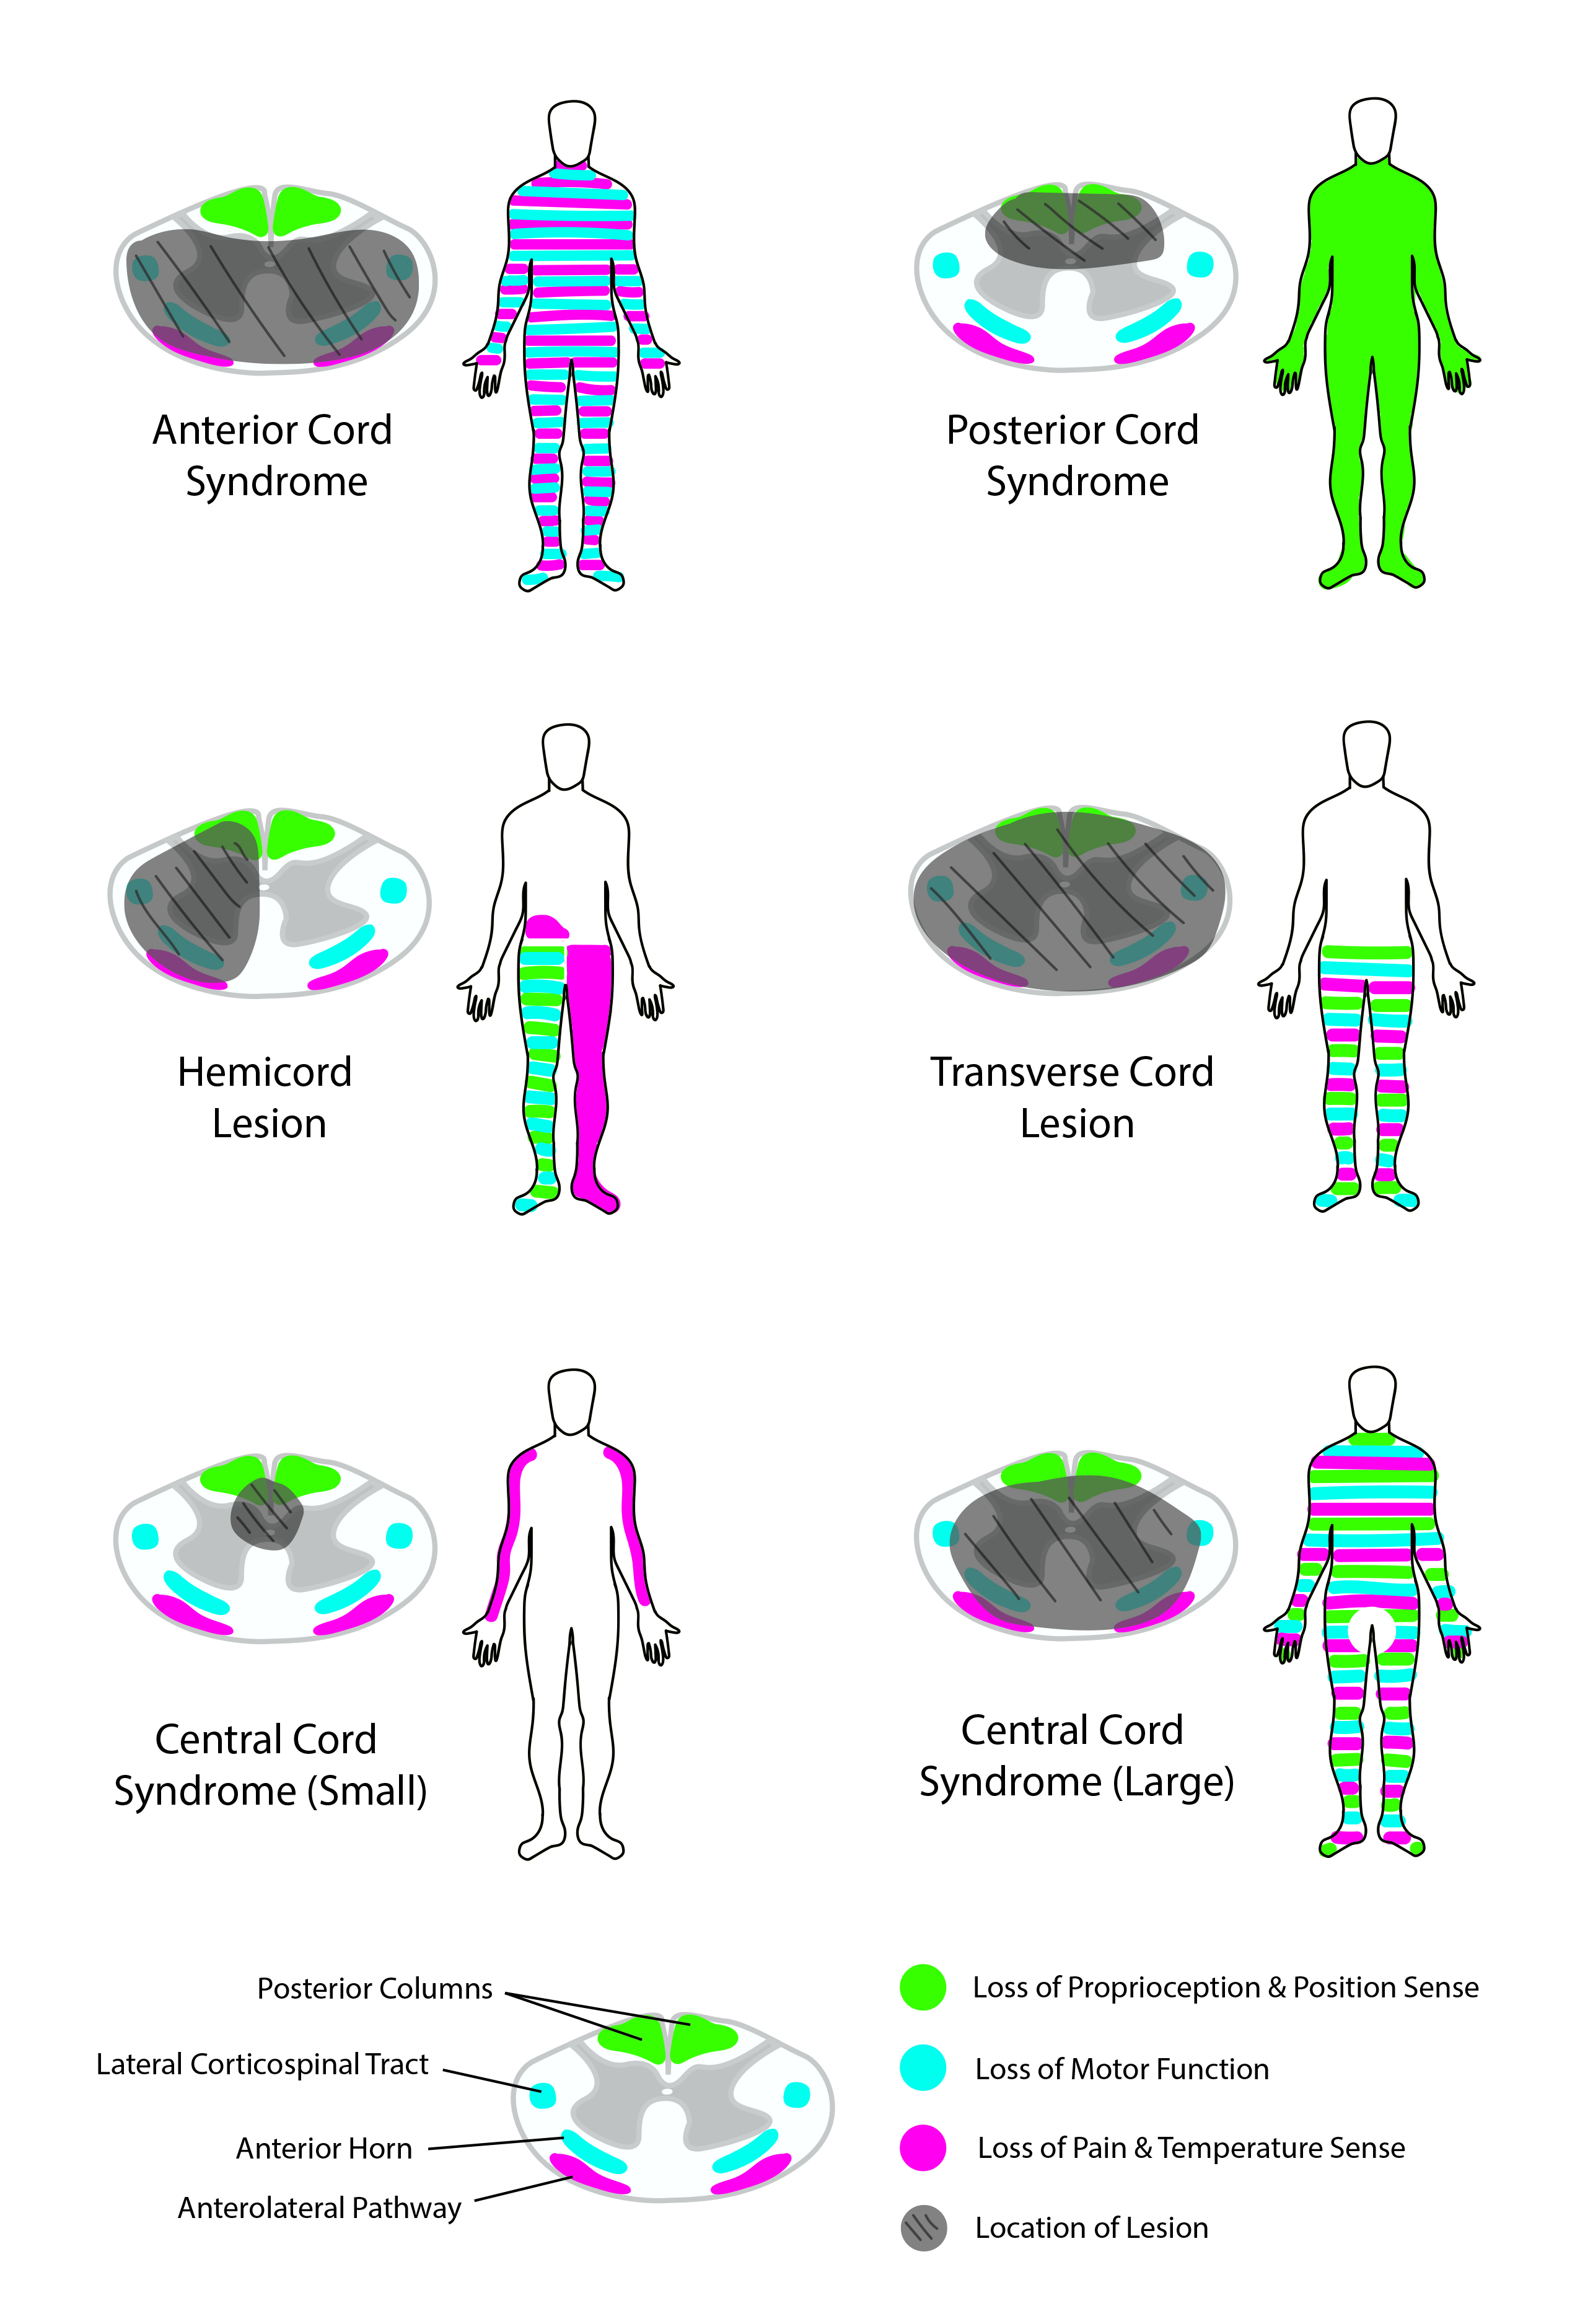 <p>Spinal Cord Syndromes. This image details common spinal cord syndromes and the neurological deficits they may cause.</p>